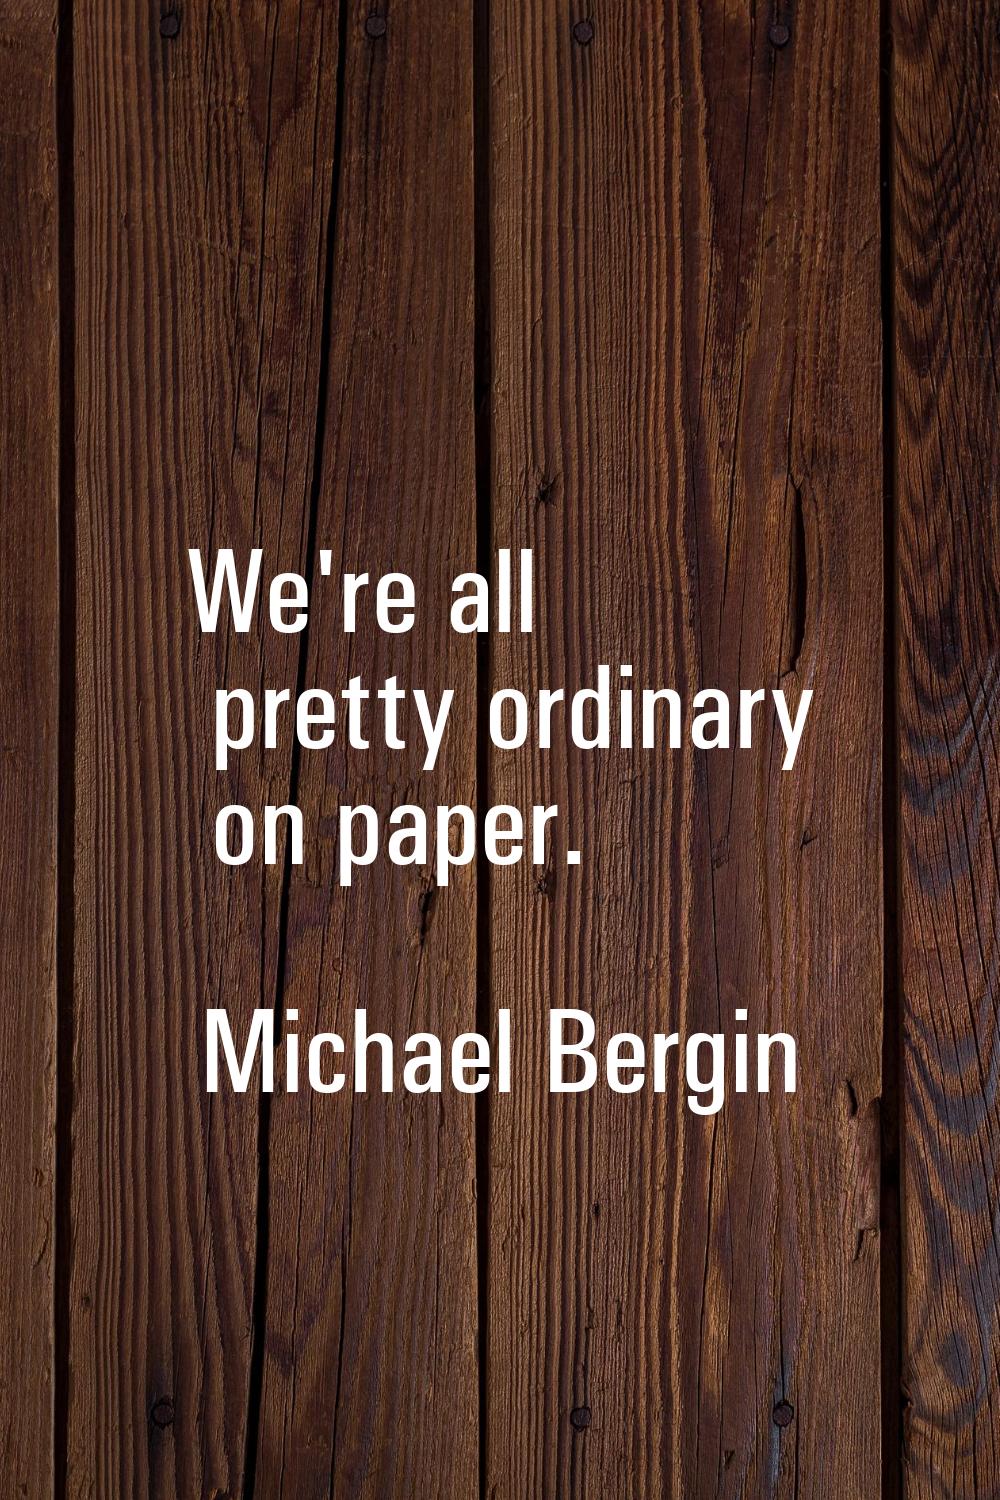 We're all pretty ordinary on paper.